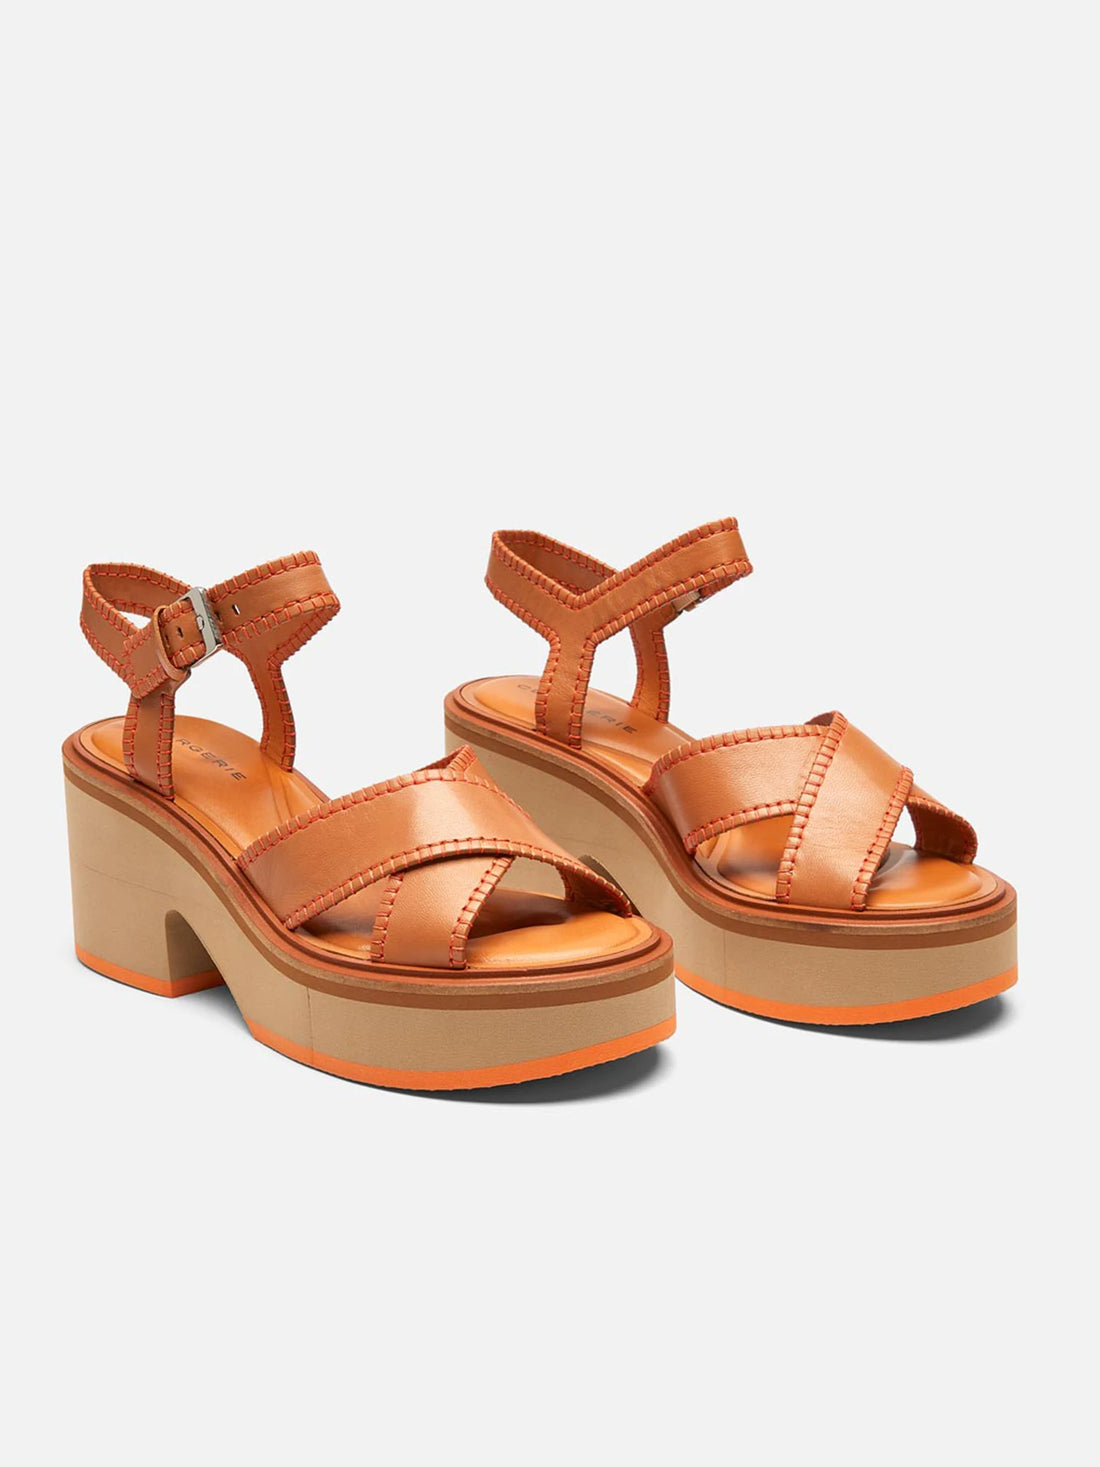 CHARLINE sandals, brown lambskin || OUTLET